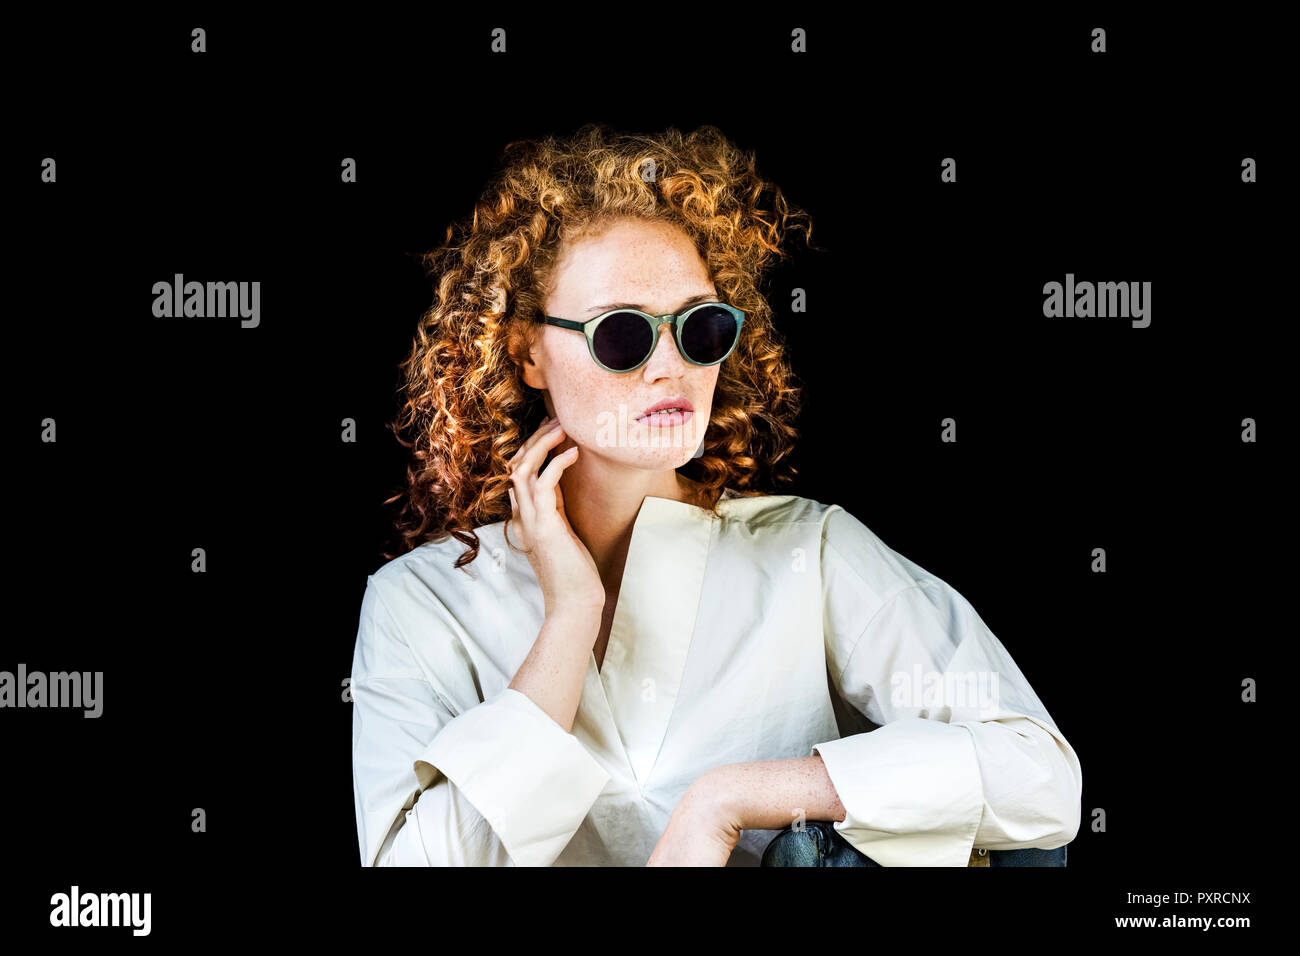 Portrait of stylish young woman with curly red hair wearing sunglasses in front of black background Stock Photo